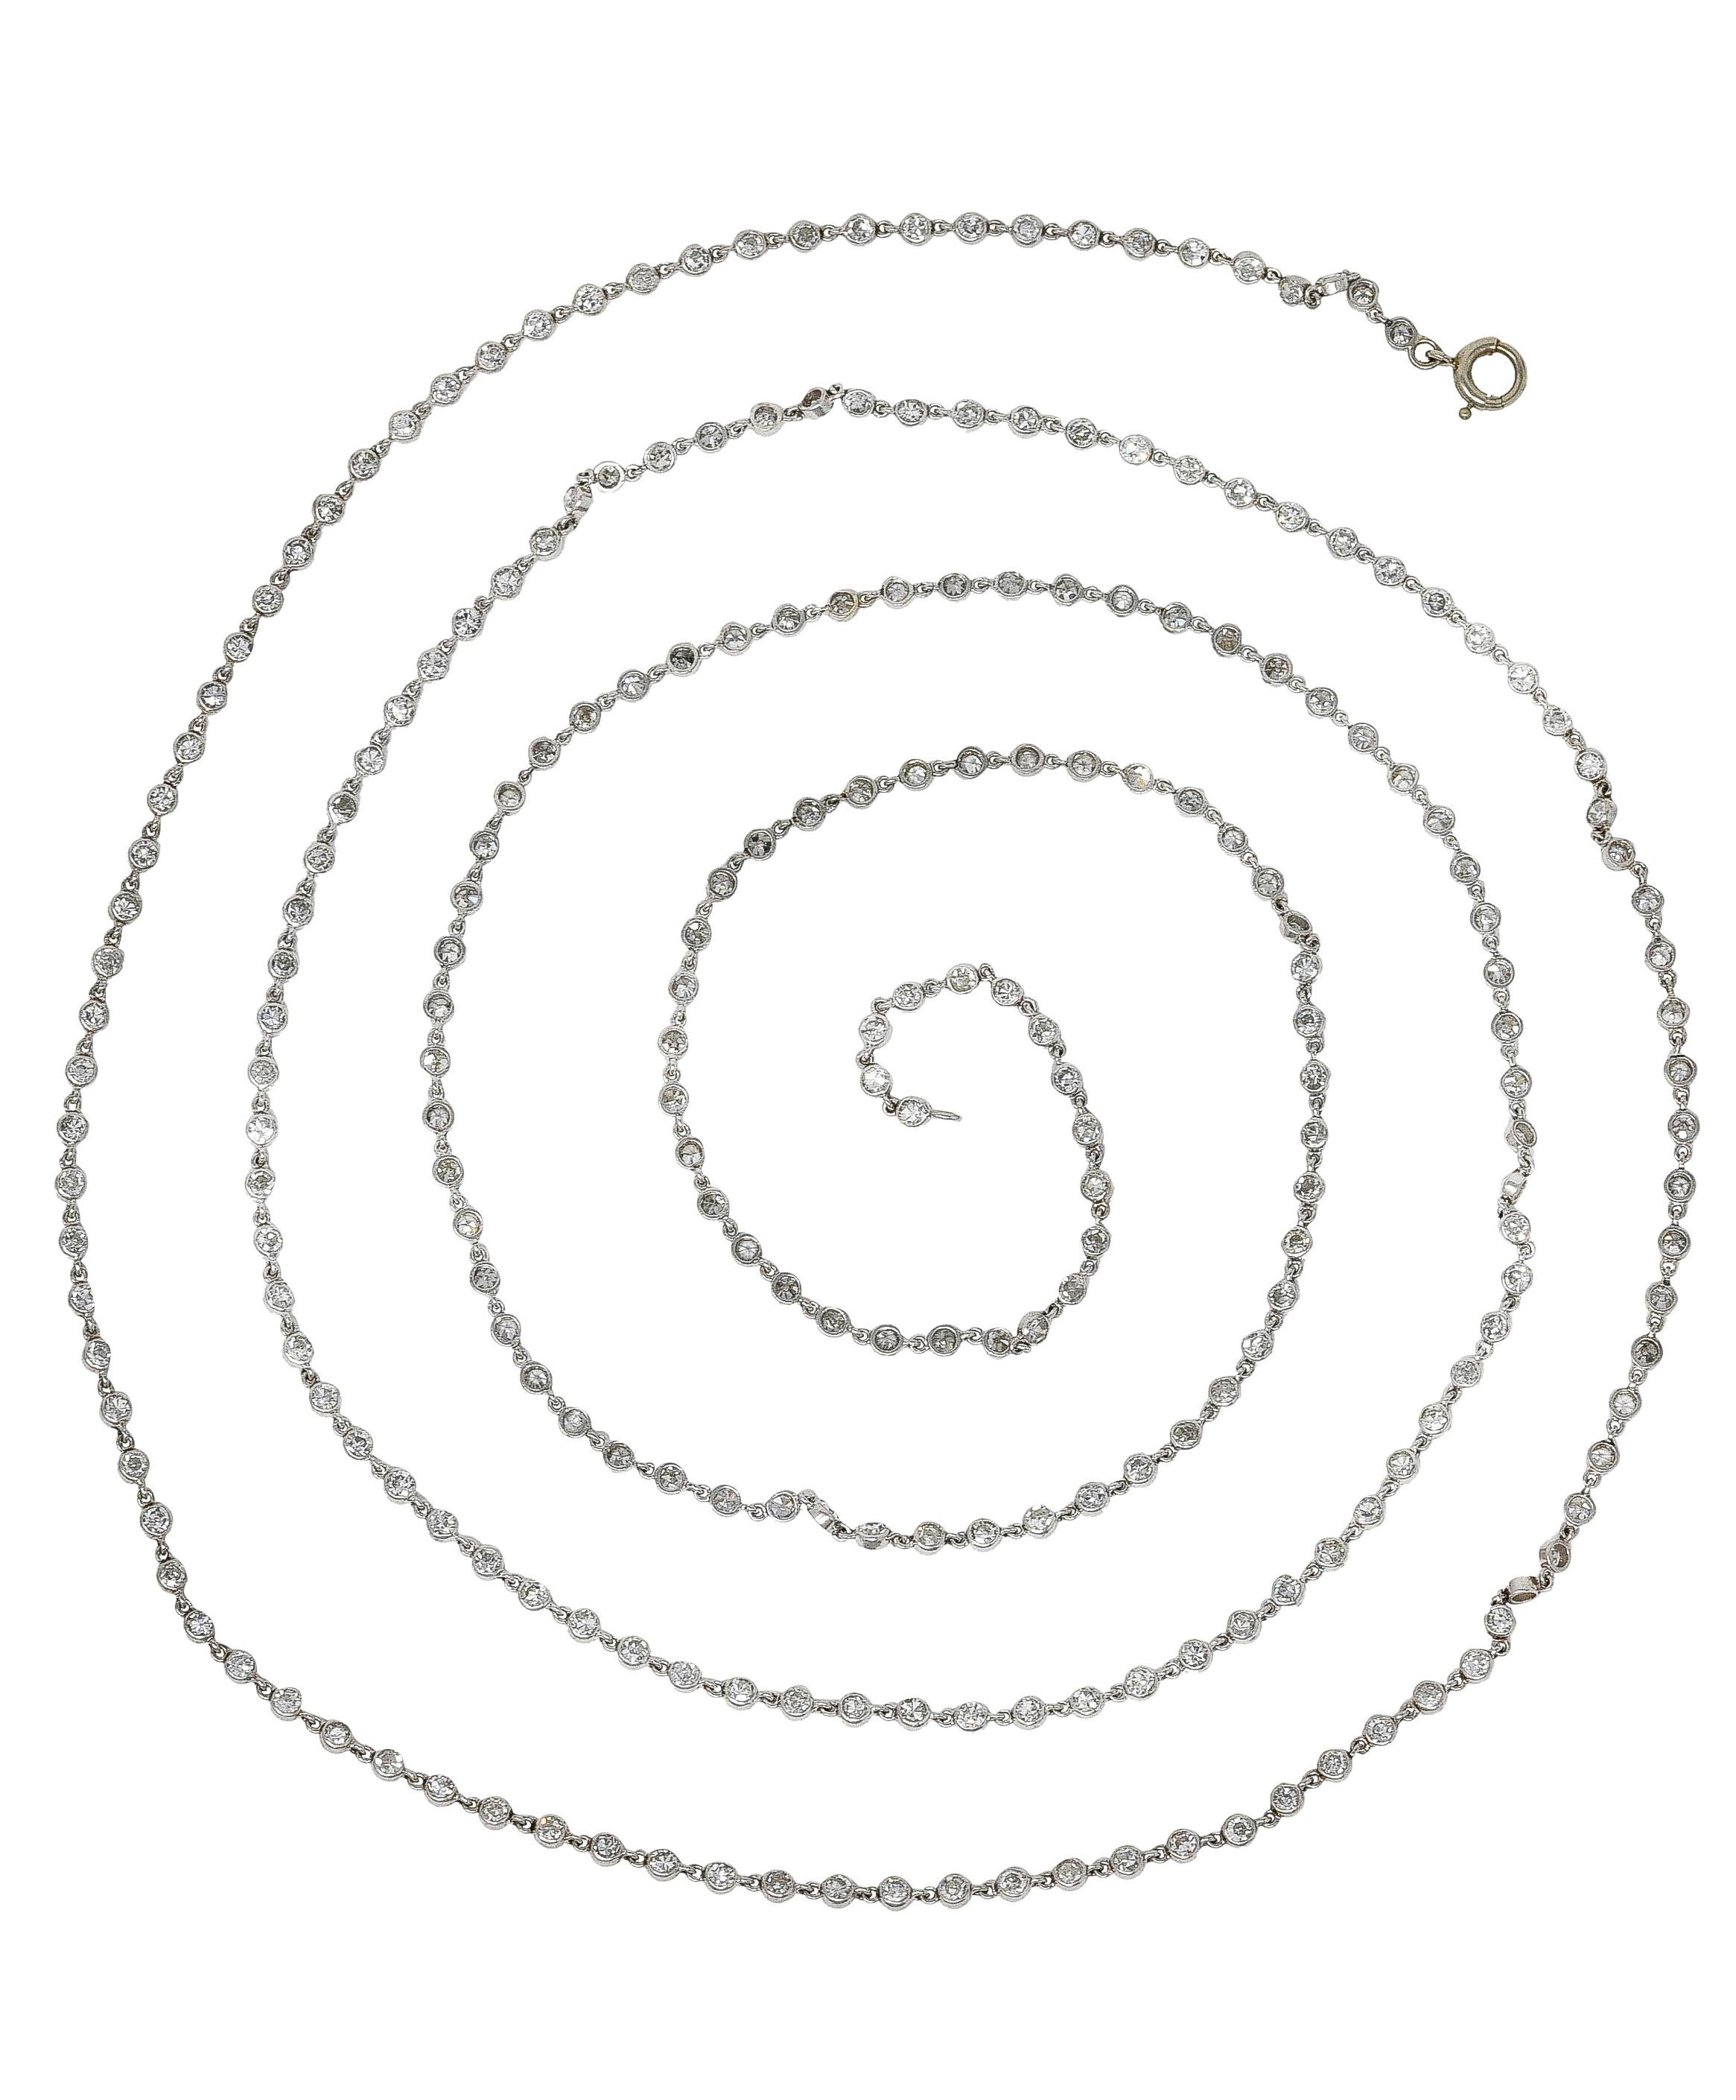 Long chain necklace is comprised of bezel set diamond links. Articulated and featuring single cut diamonds. Weighing in total approximately 7.50 carats - G to I color with SI clarity. Completed by a white gold spring ring clasp - tested. Links